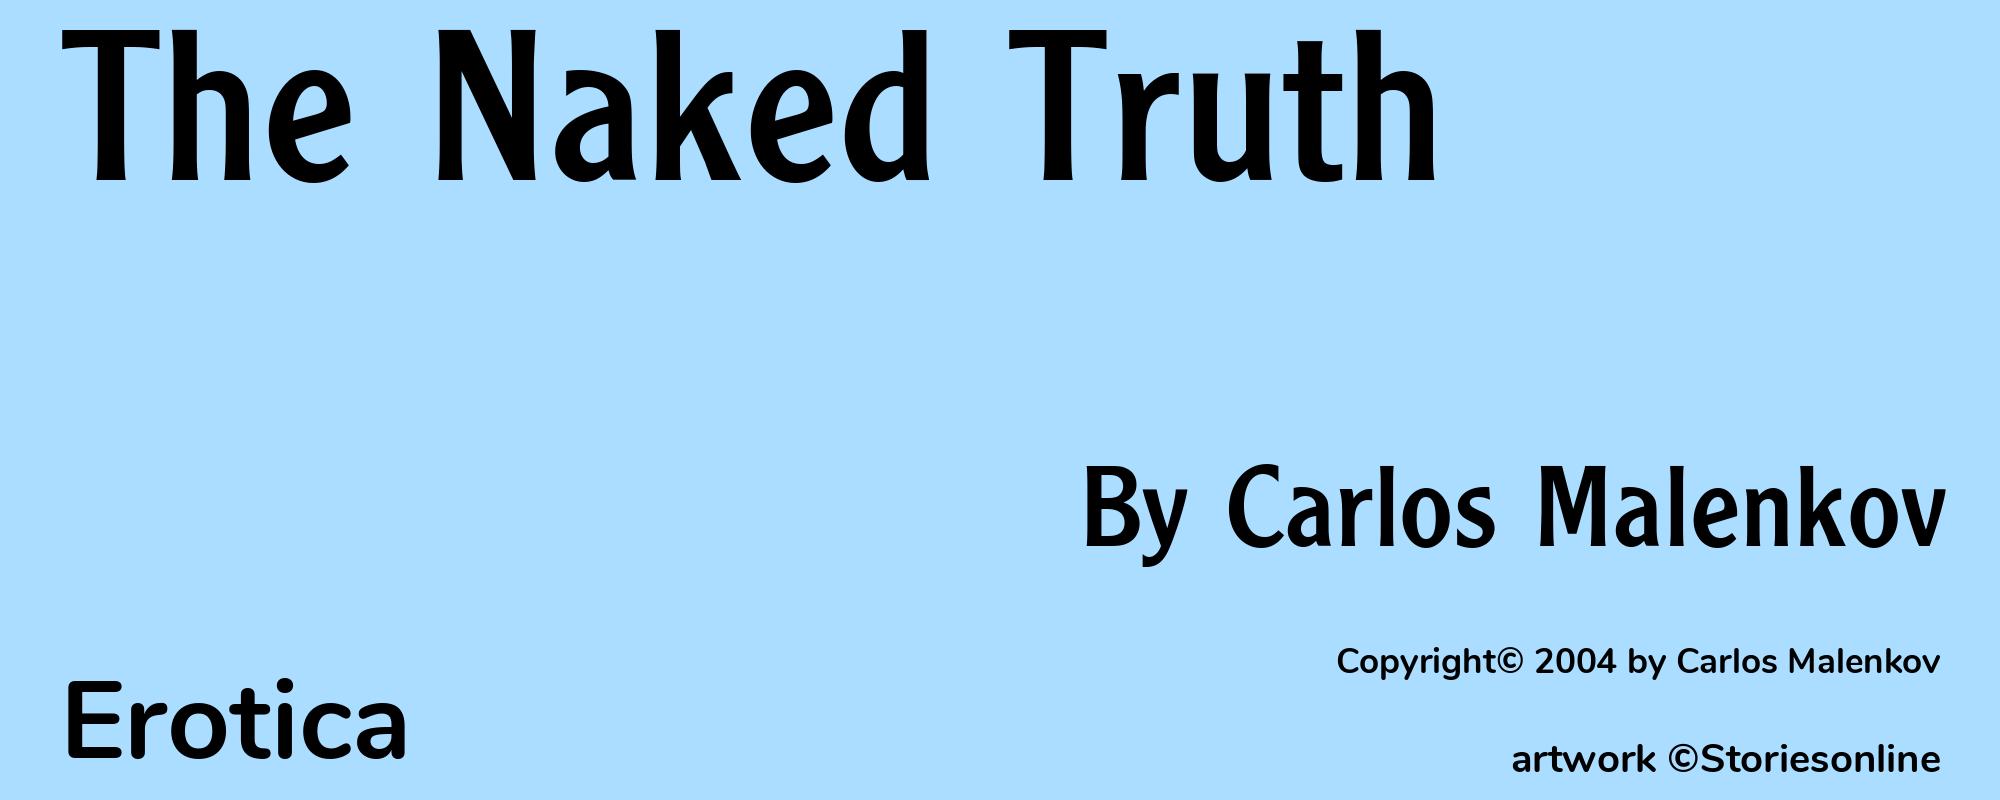 The Naked Truth - Cover